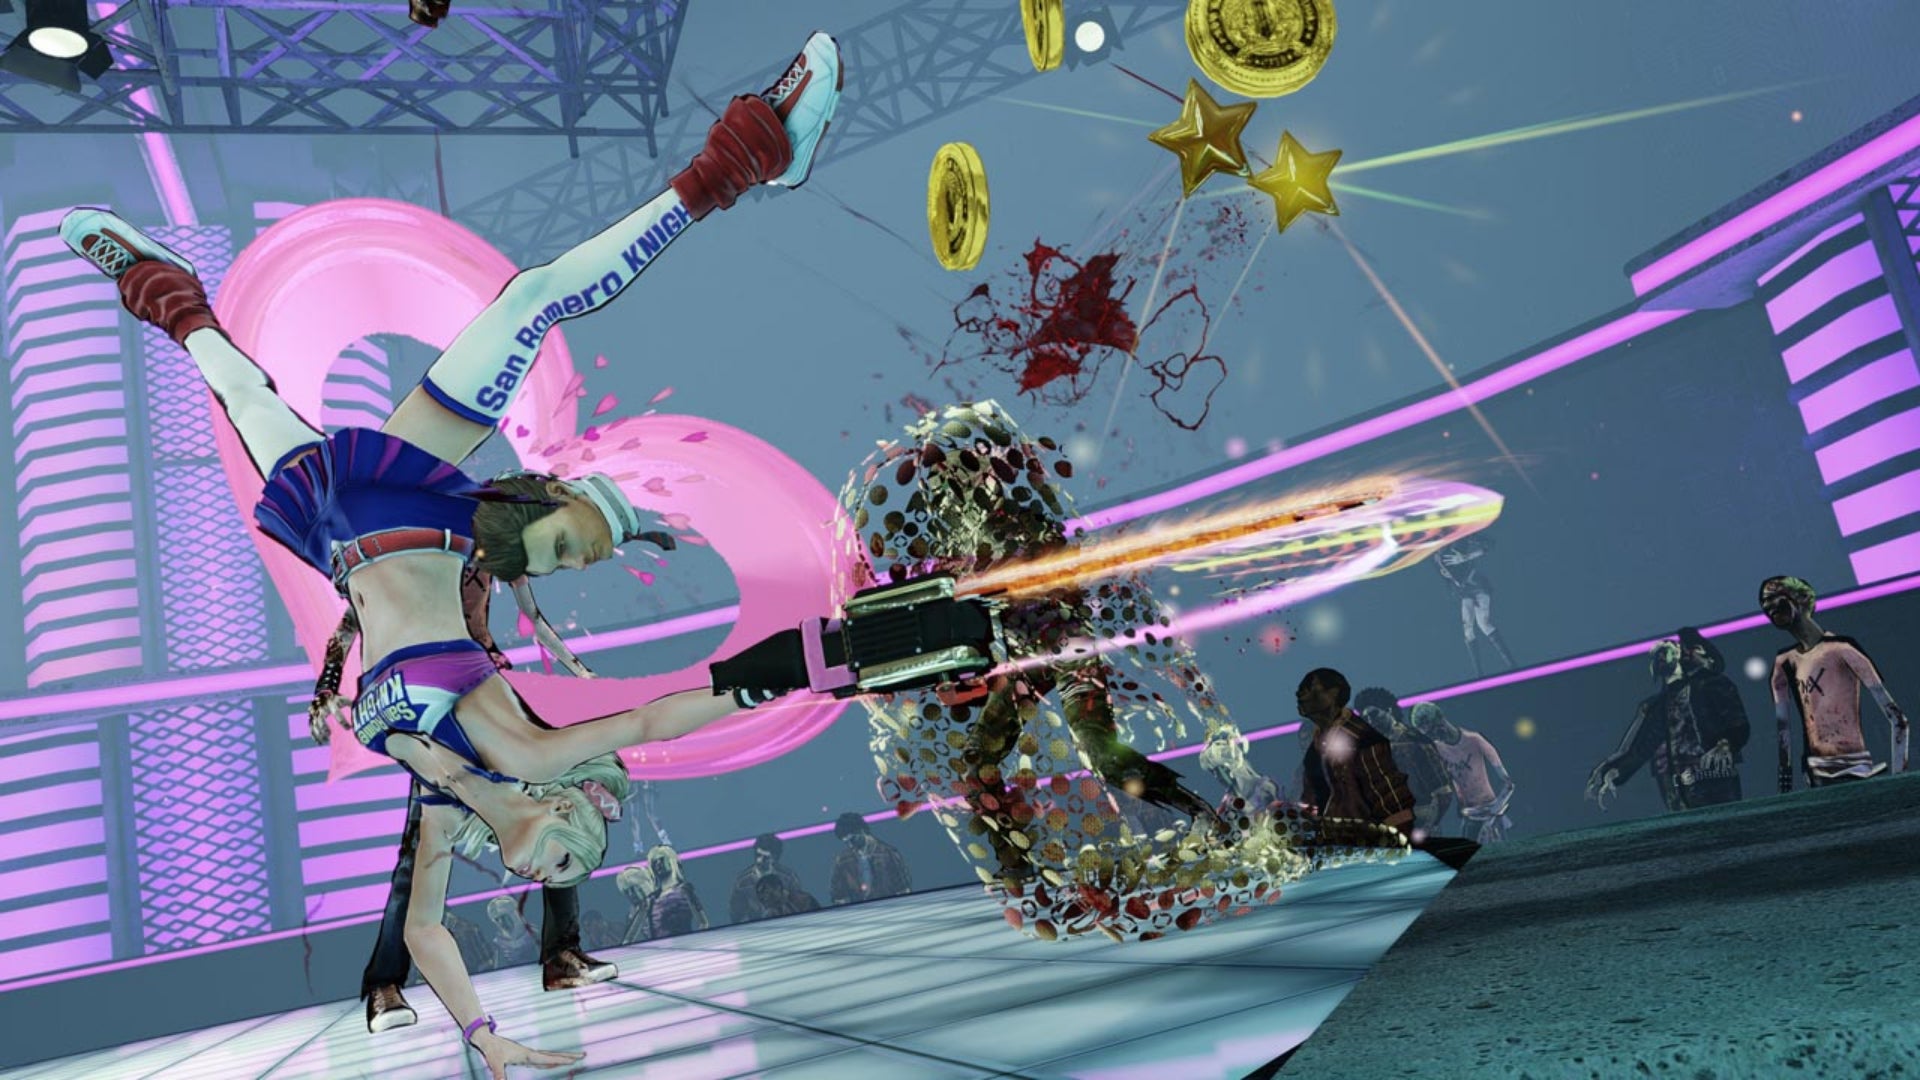 Juliet hacks off someone's head with her chainsaw while upside down, in Lollipop Chainsaw.